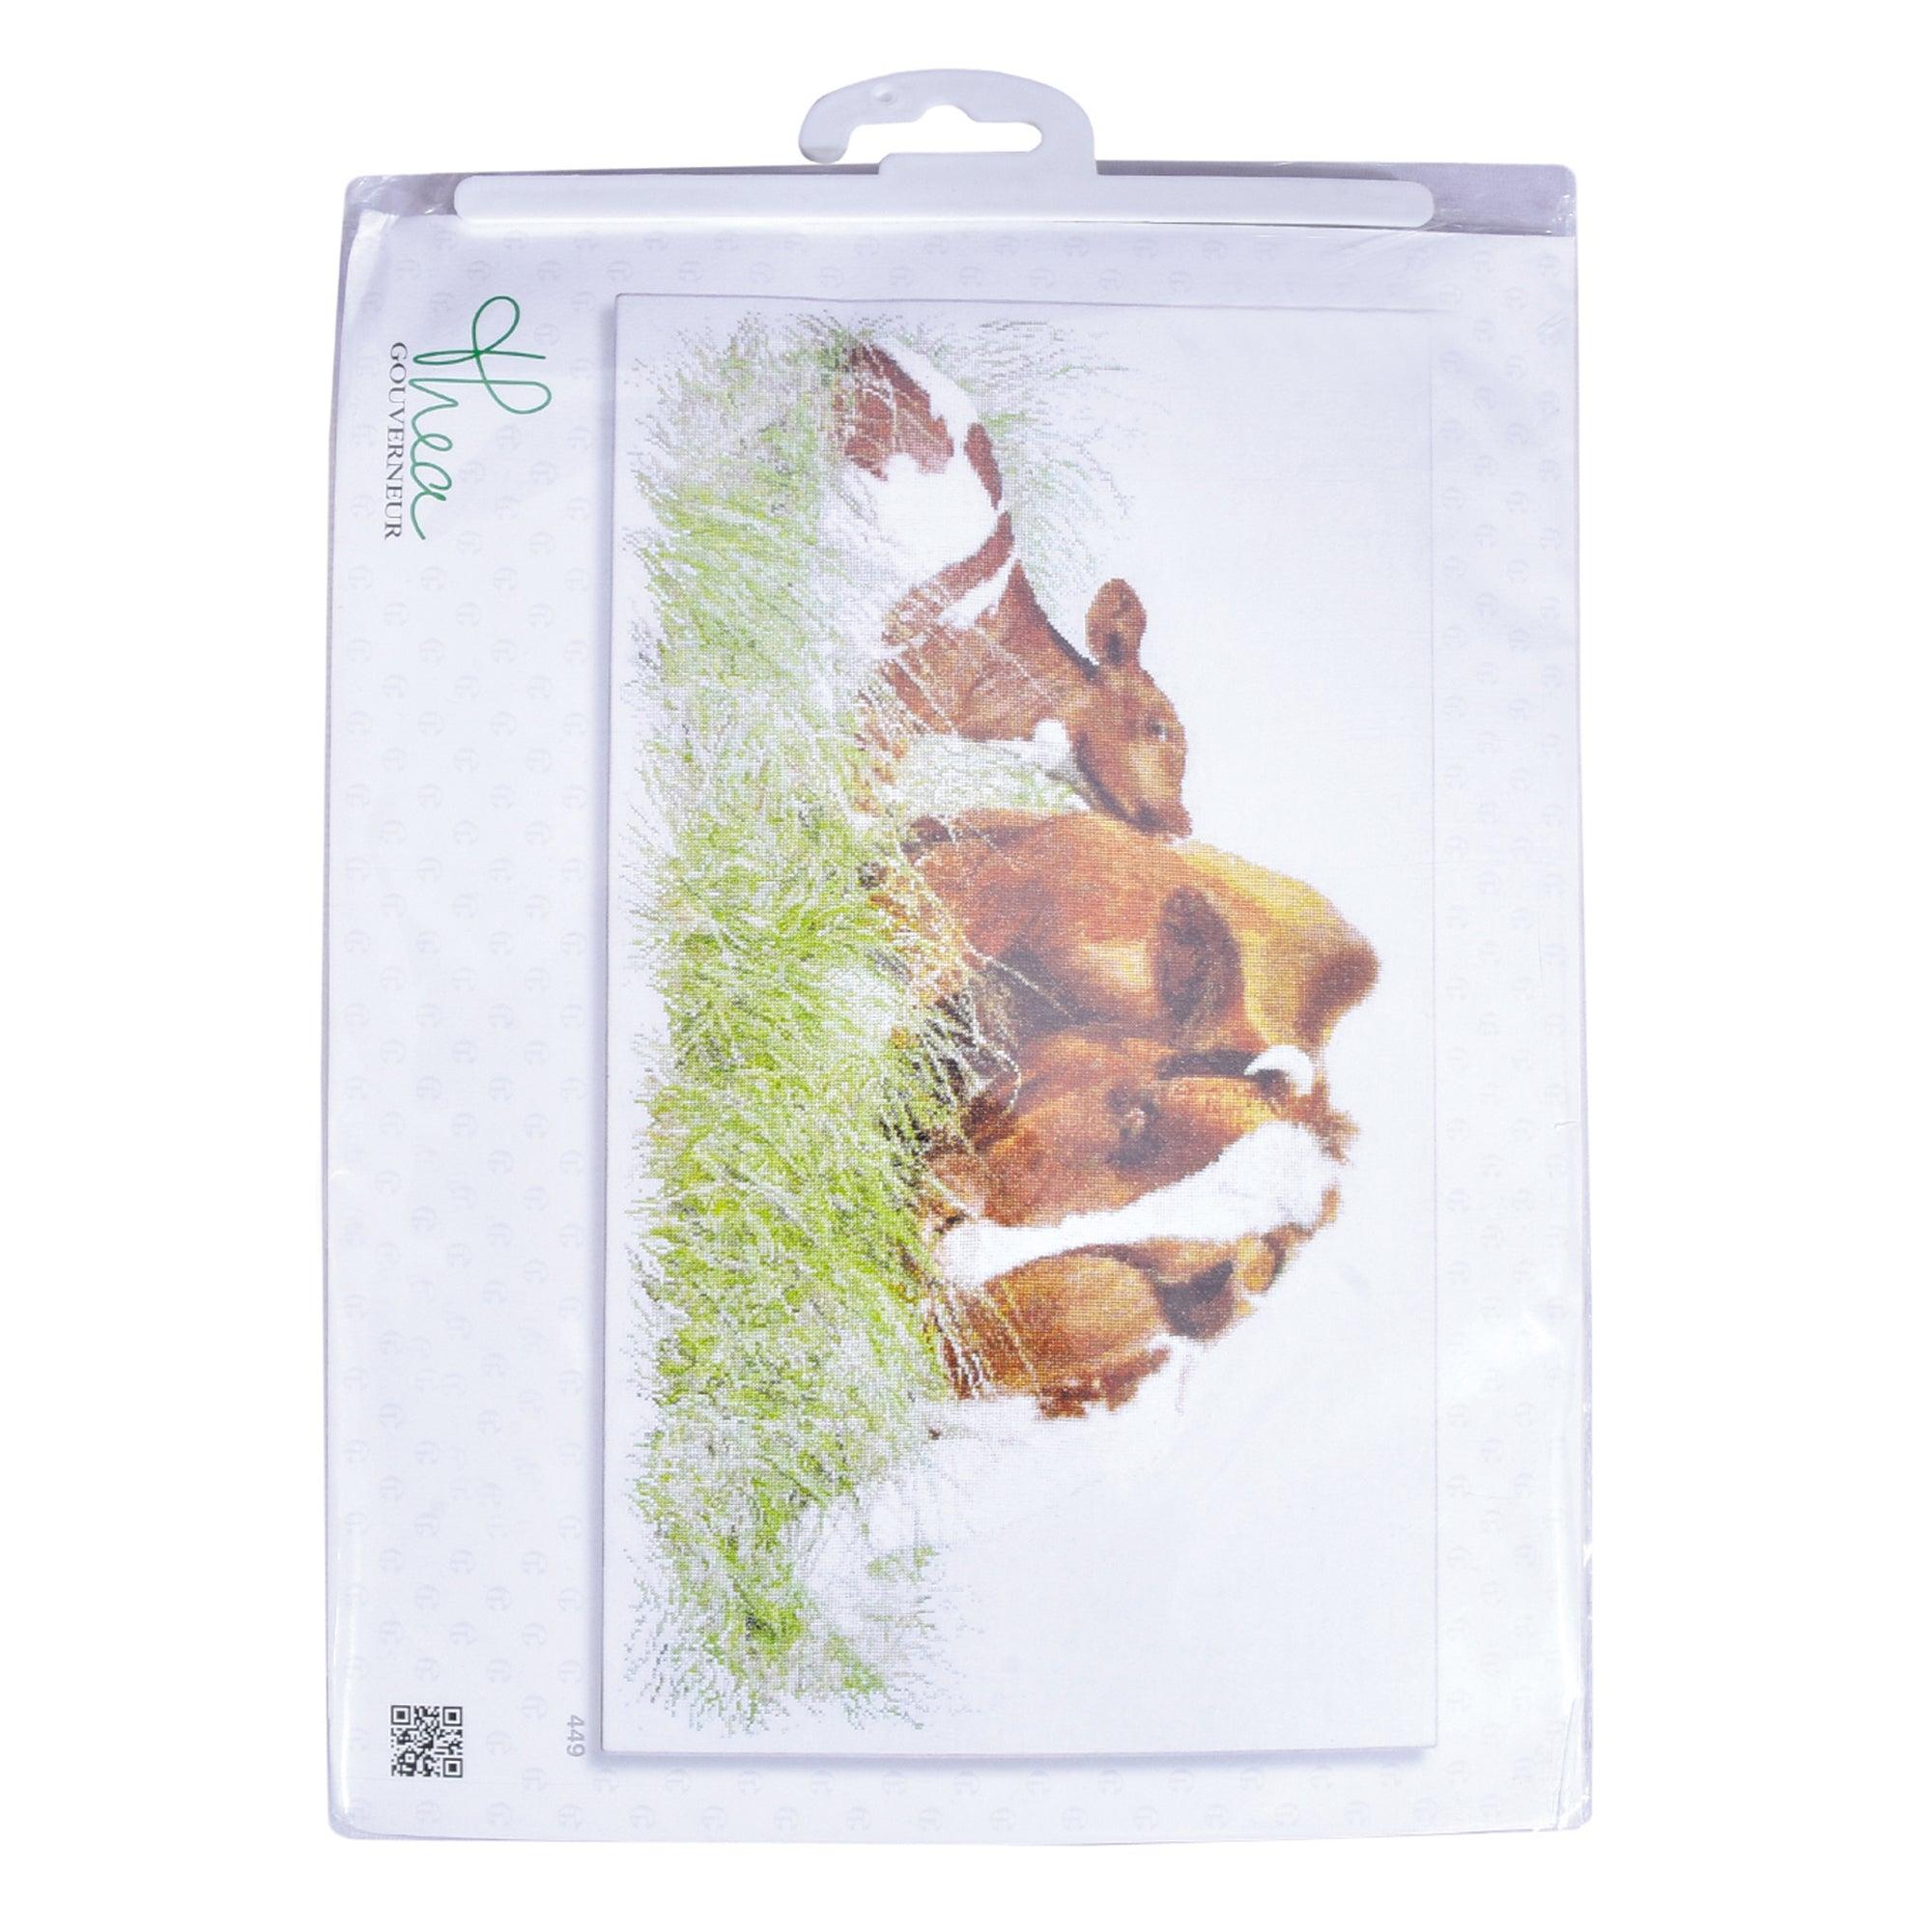 Thea Gouverneur - Counted Cross Stitch Kit - Red Cow - Aida - 16 count - 449A - Thea Gouverneur Since 1959